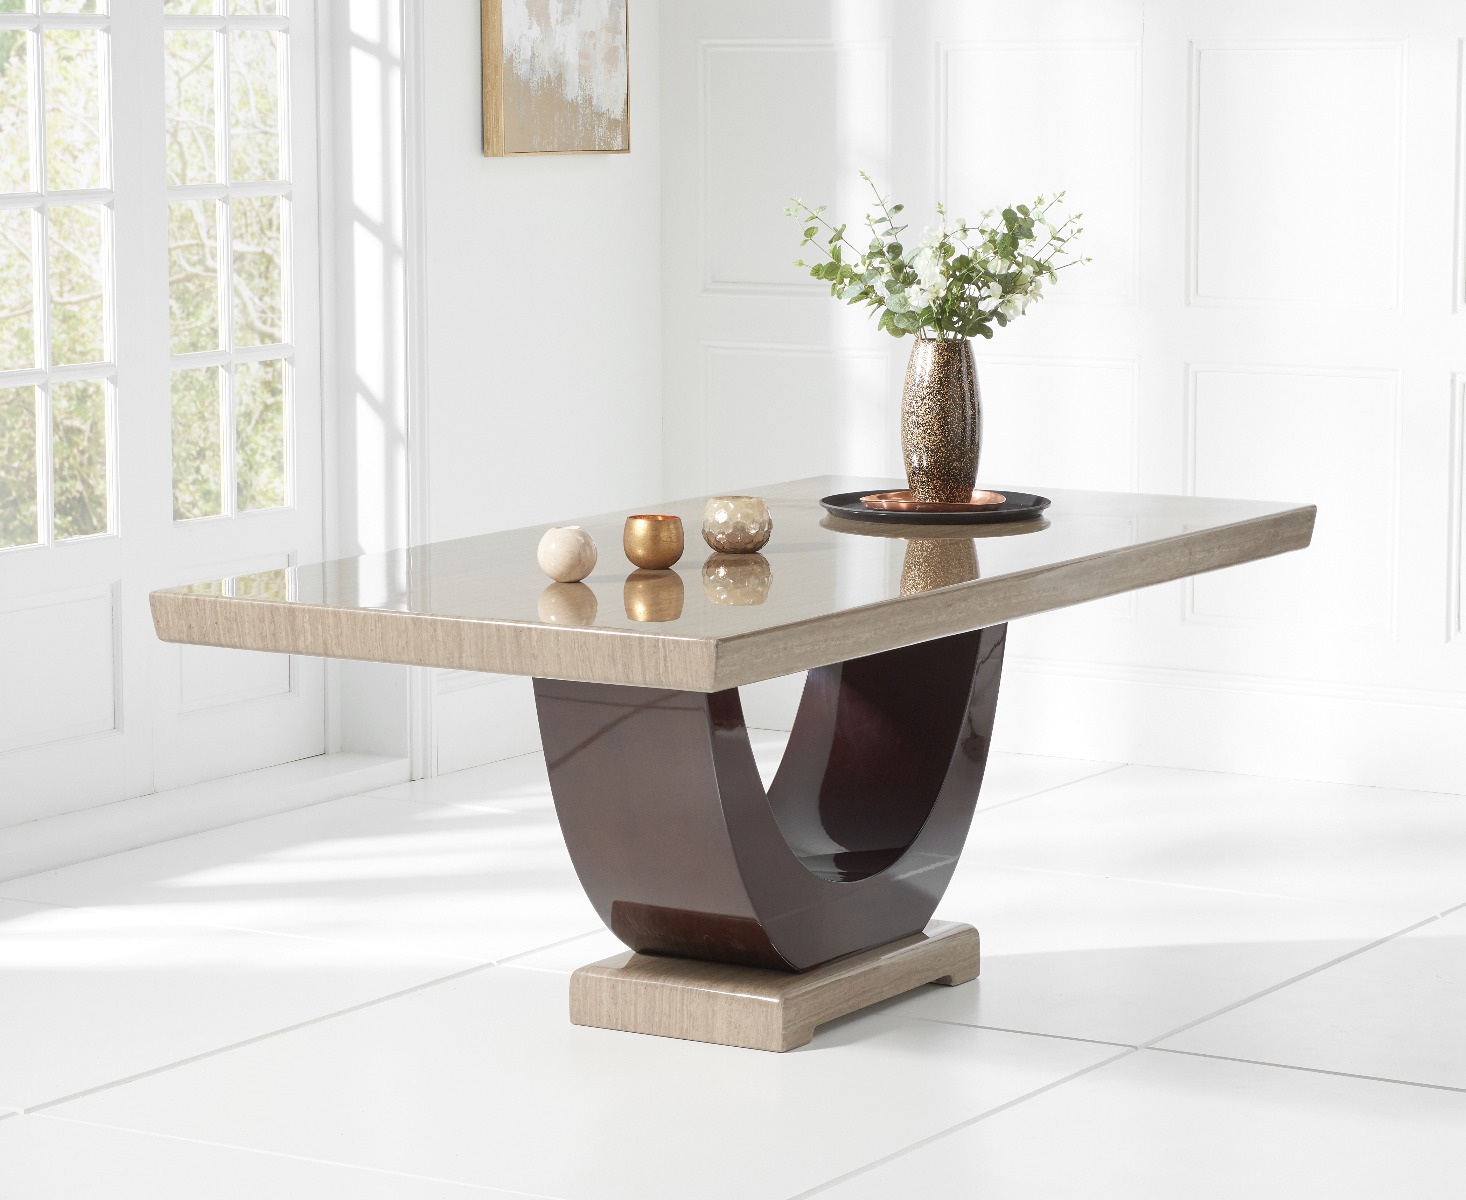 Photo 3 of Novara 170cm brown pedestal marble dining table with 6 grey francesca chairs